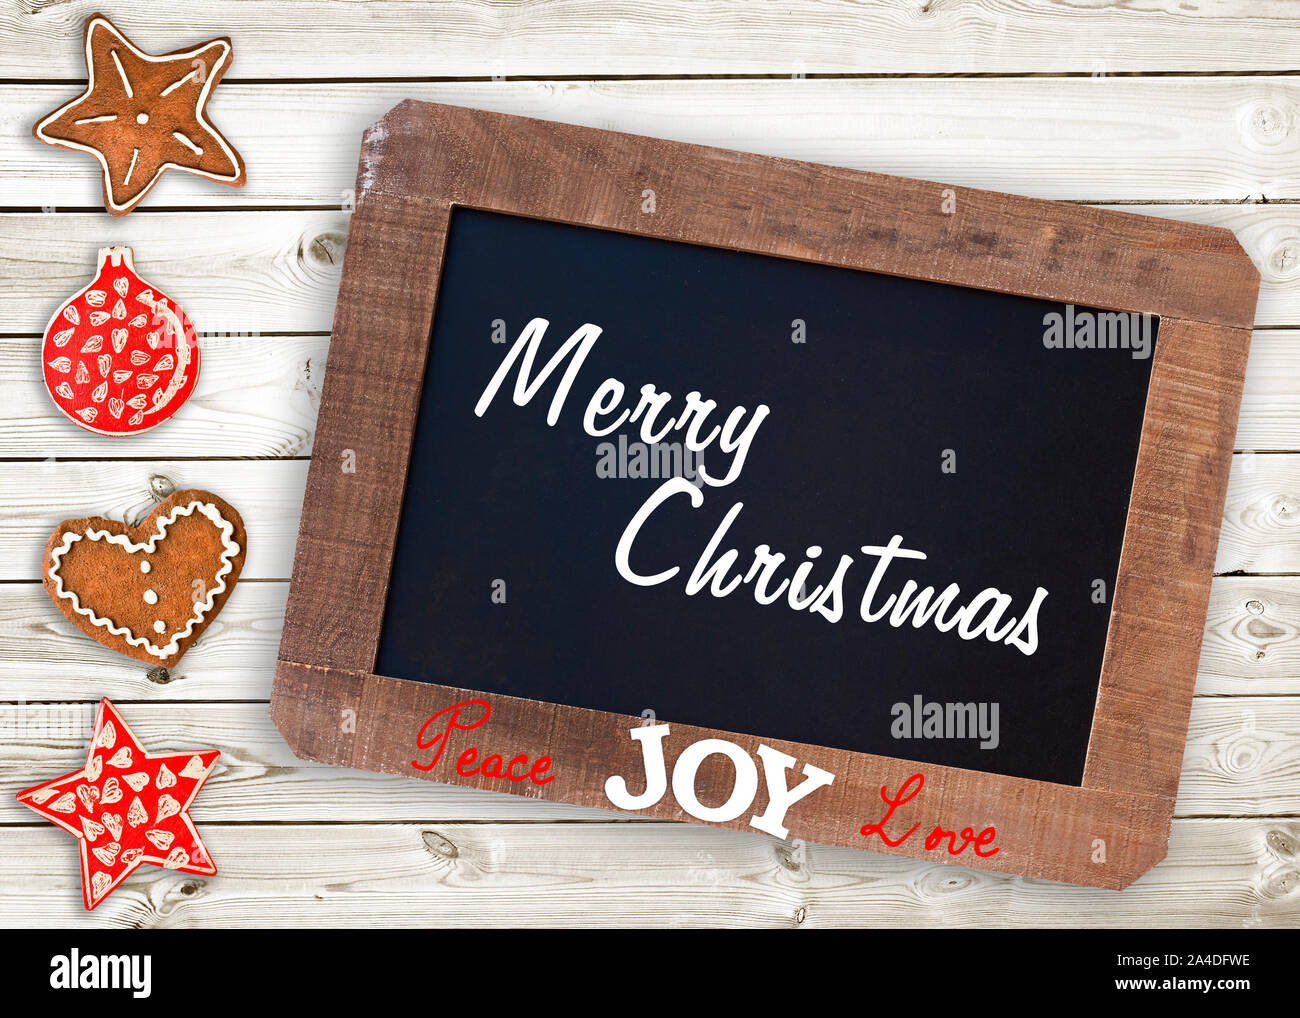 Merry christmas written on a vintage wooden chalkboard. Ginger bread cookies and Christmas ornaments on wooden planks. Christmas card. Stock Photo